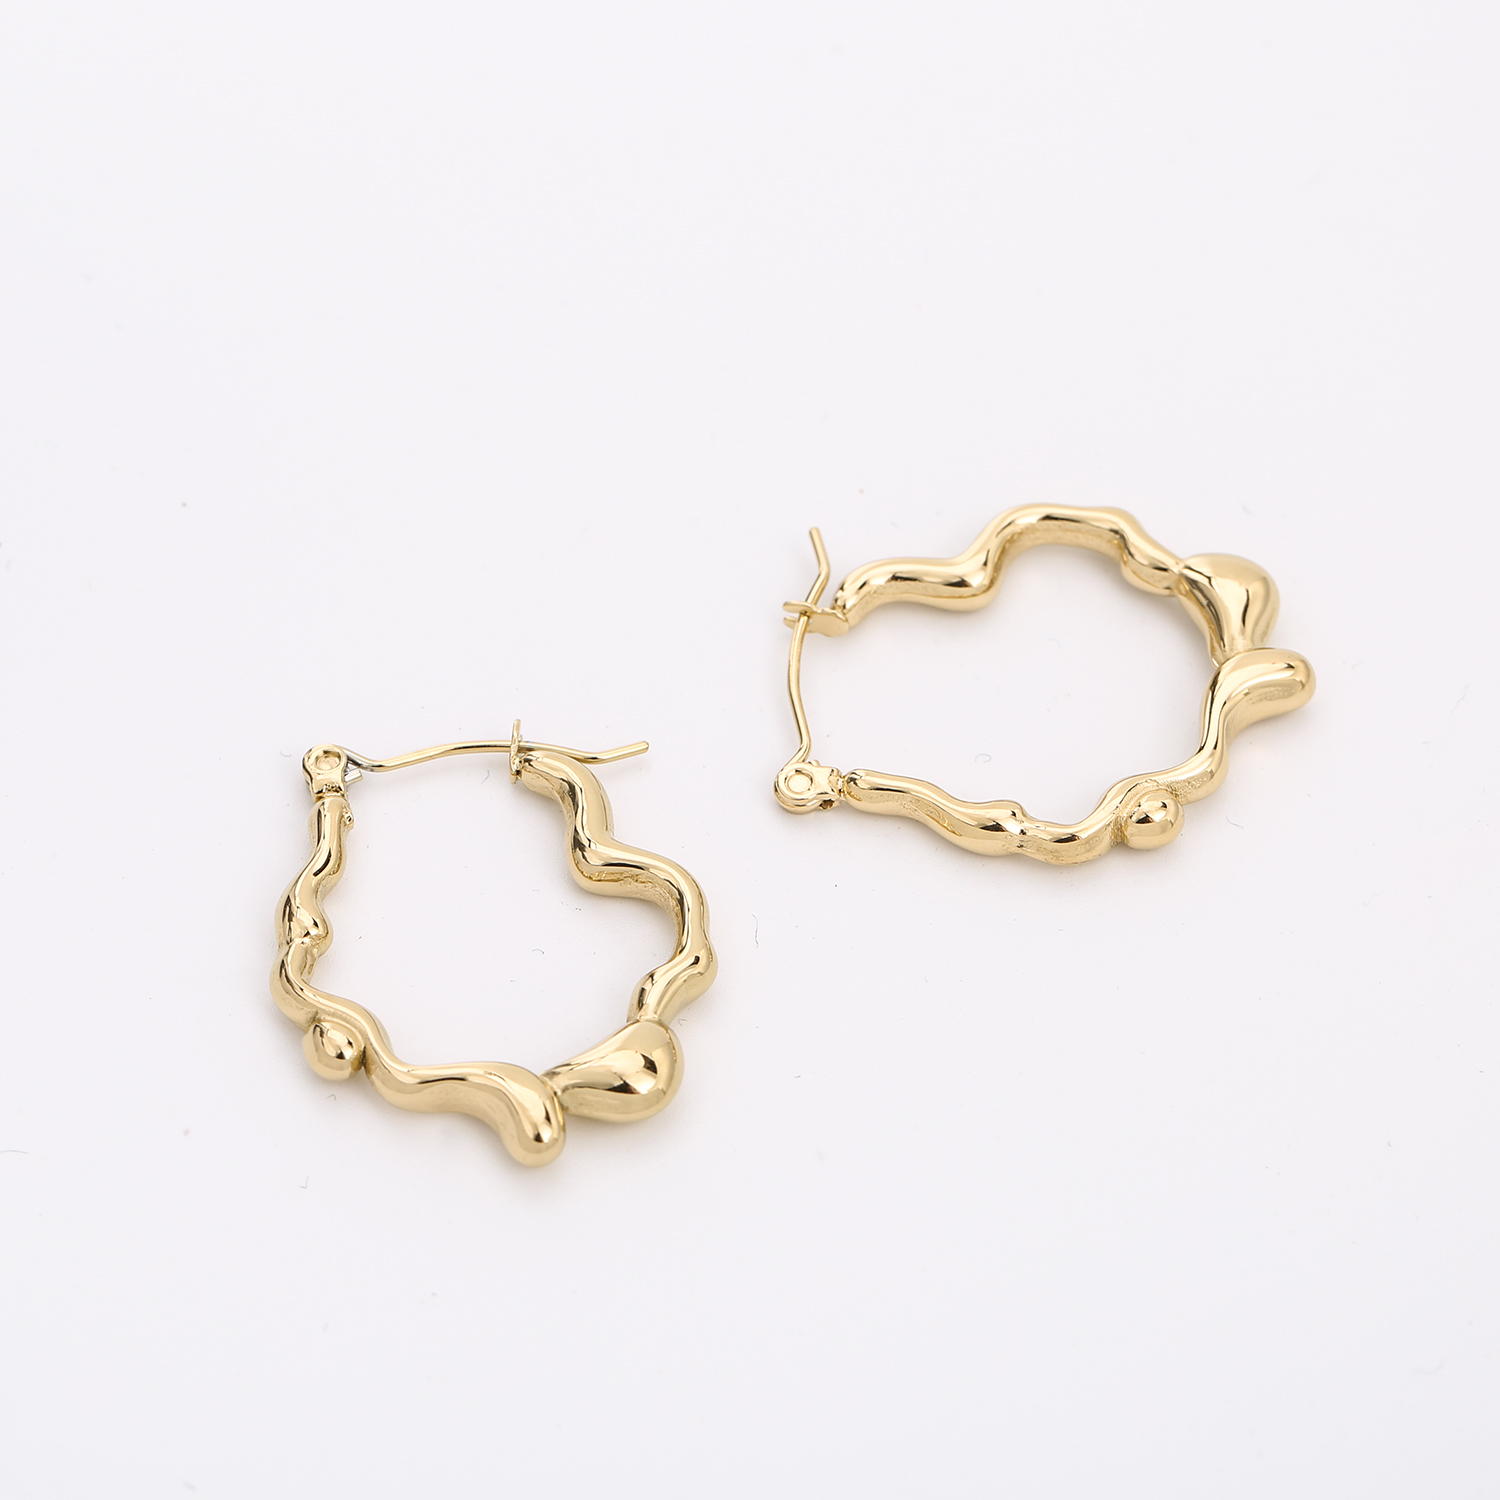 Gold stylish earrings for all kinds of parties (3)j0h